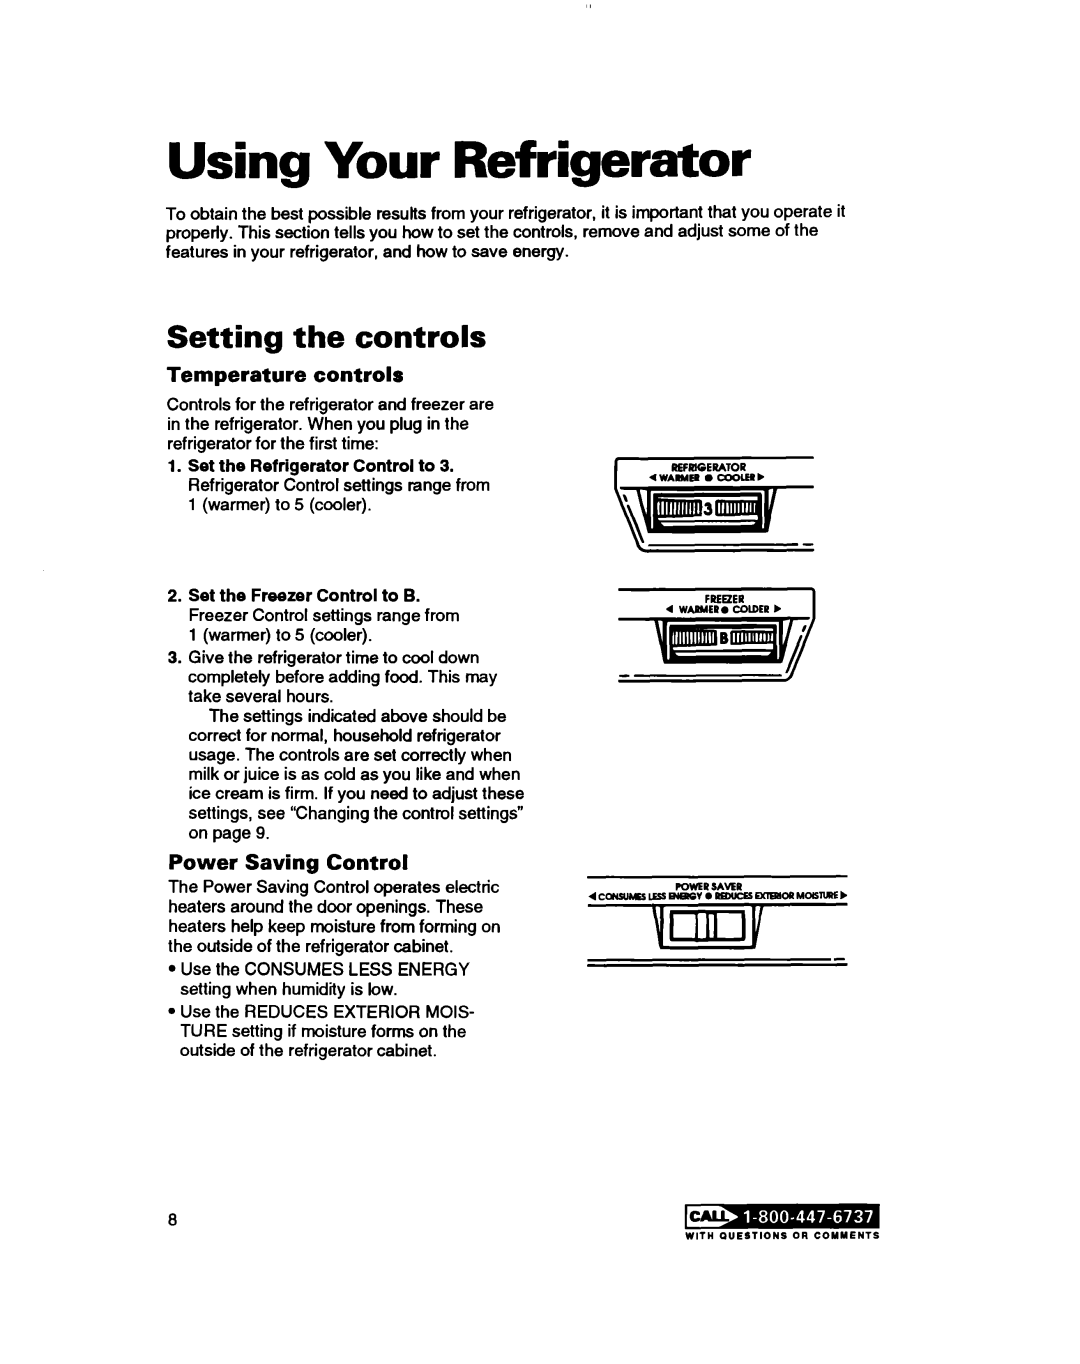 Whirlpool RT14ZK, RTl4VK warranty Using Your Refrigerator, Setting the controls, Temperature controls, Power Saving Control 